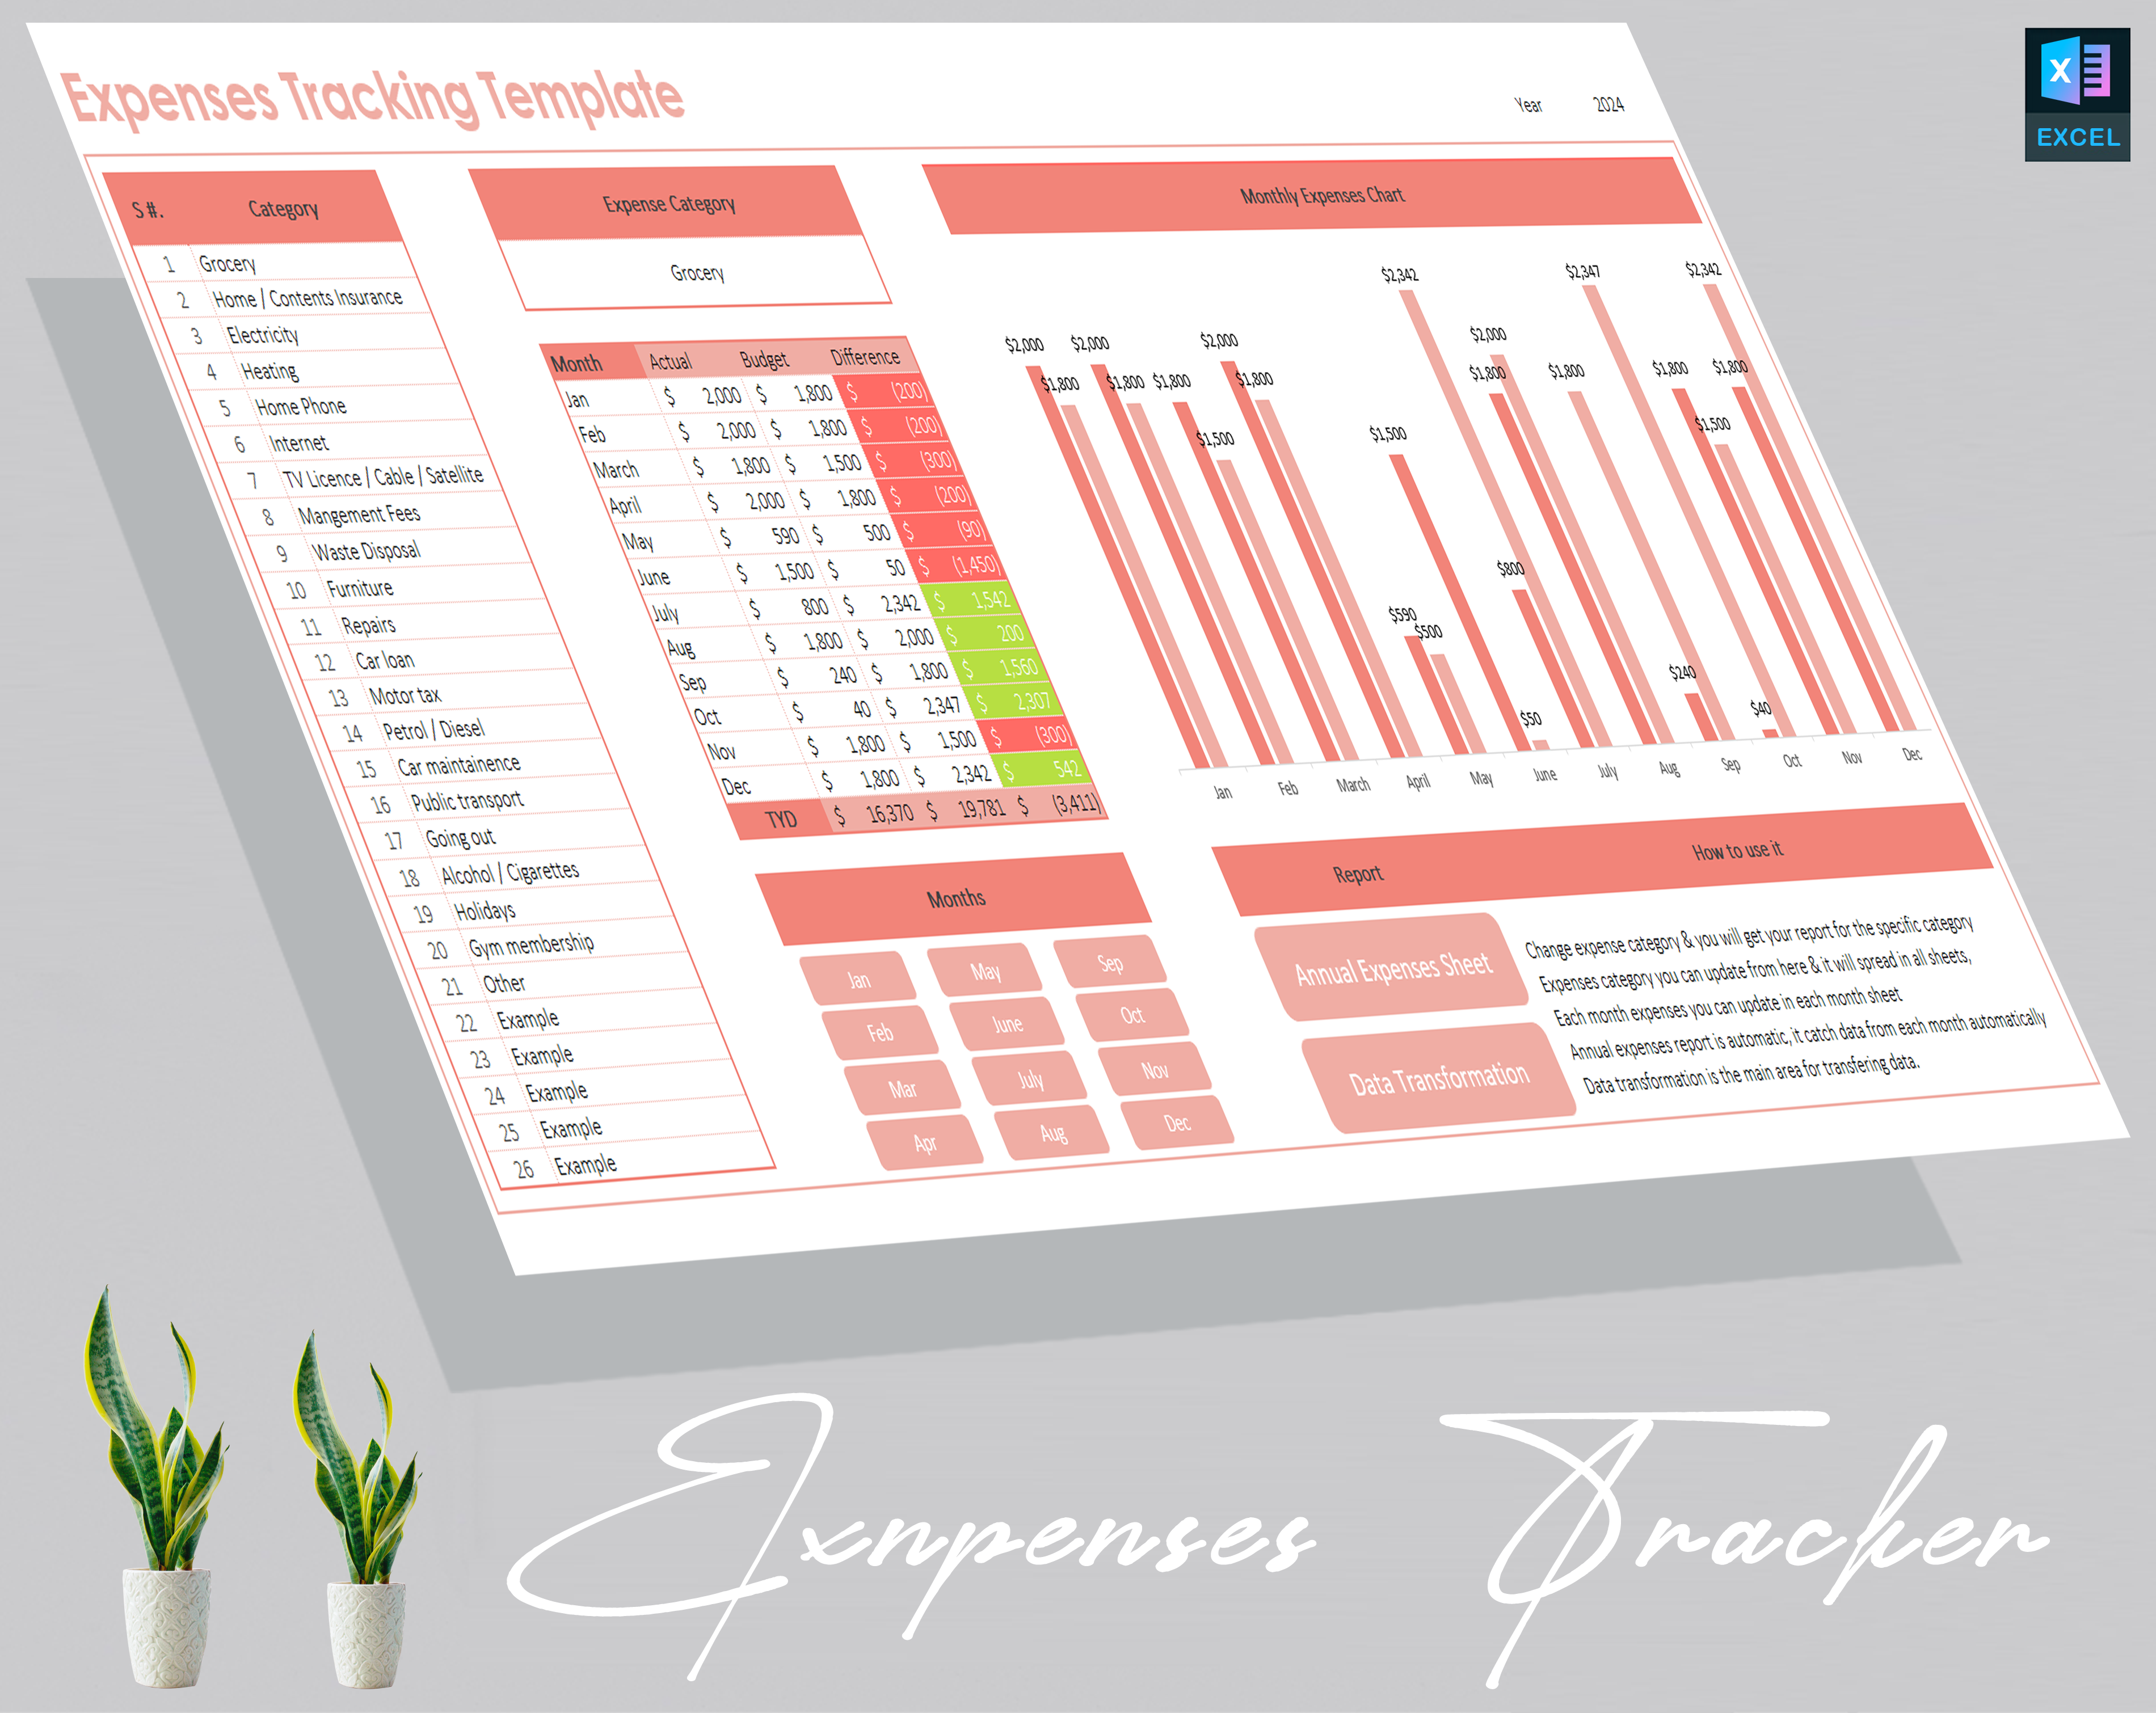 Expenses Tracking Template